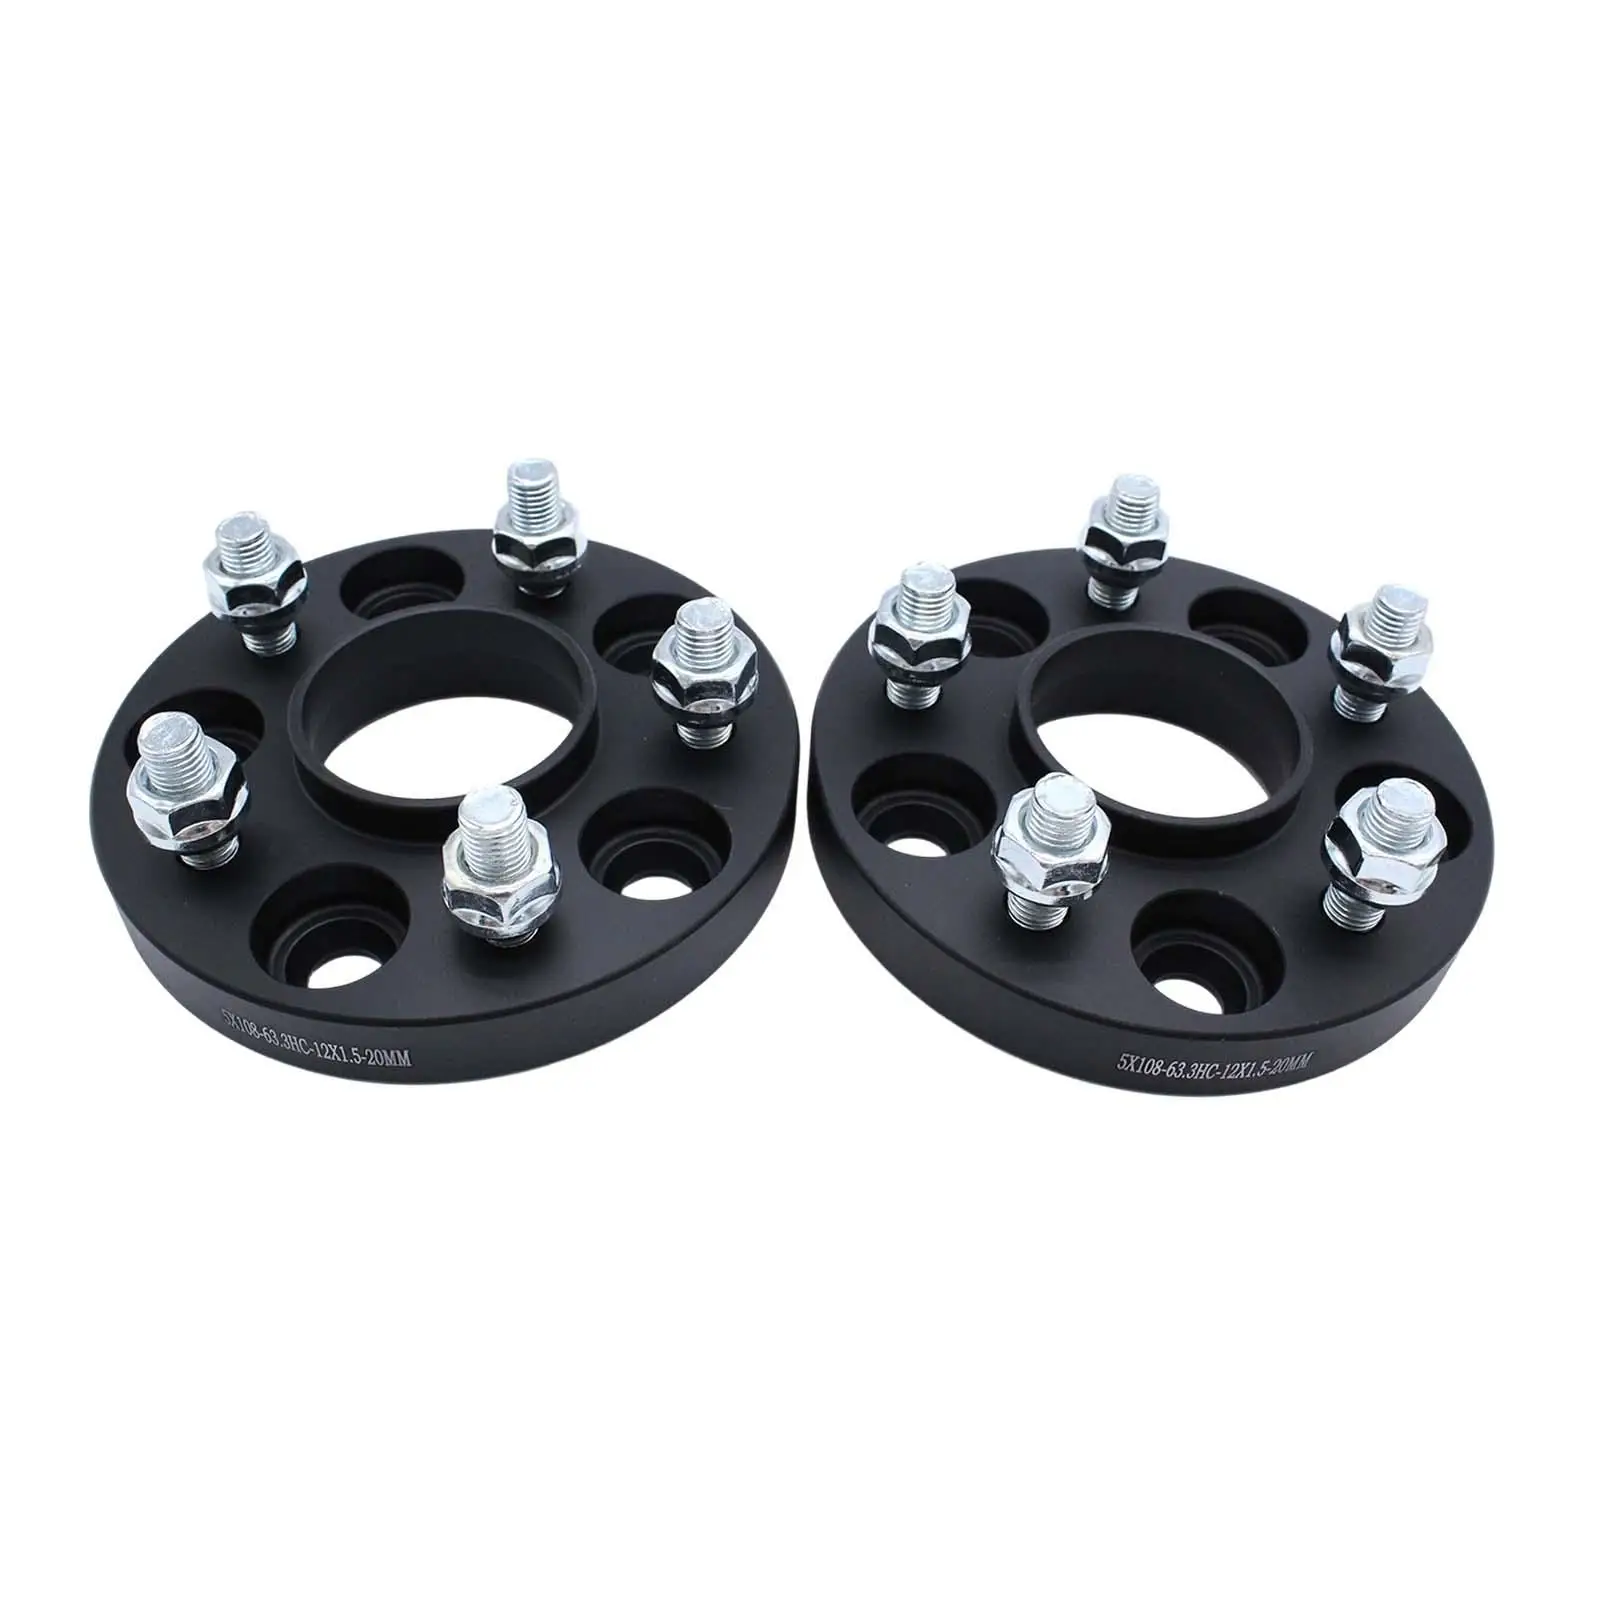 2 Pieces Hubcentric Wheel Spacers 5 Lug Wheel Spacer for Ford